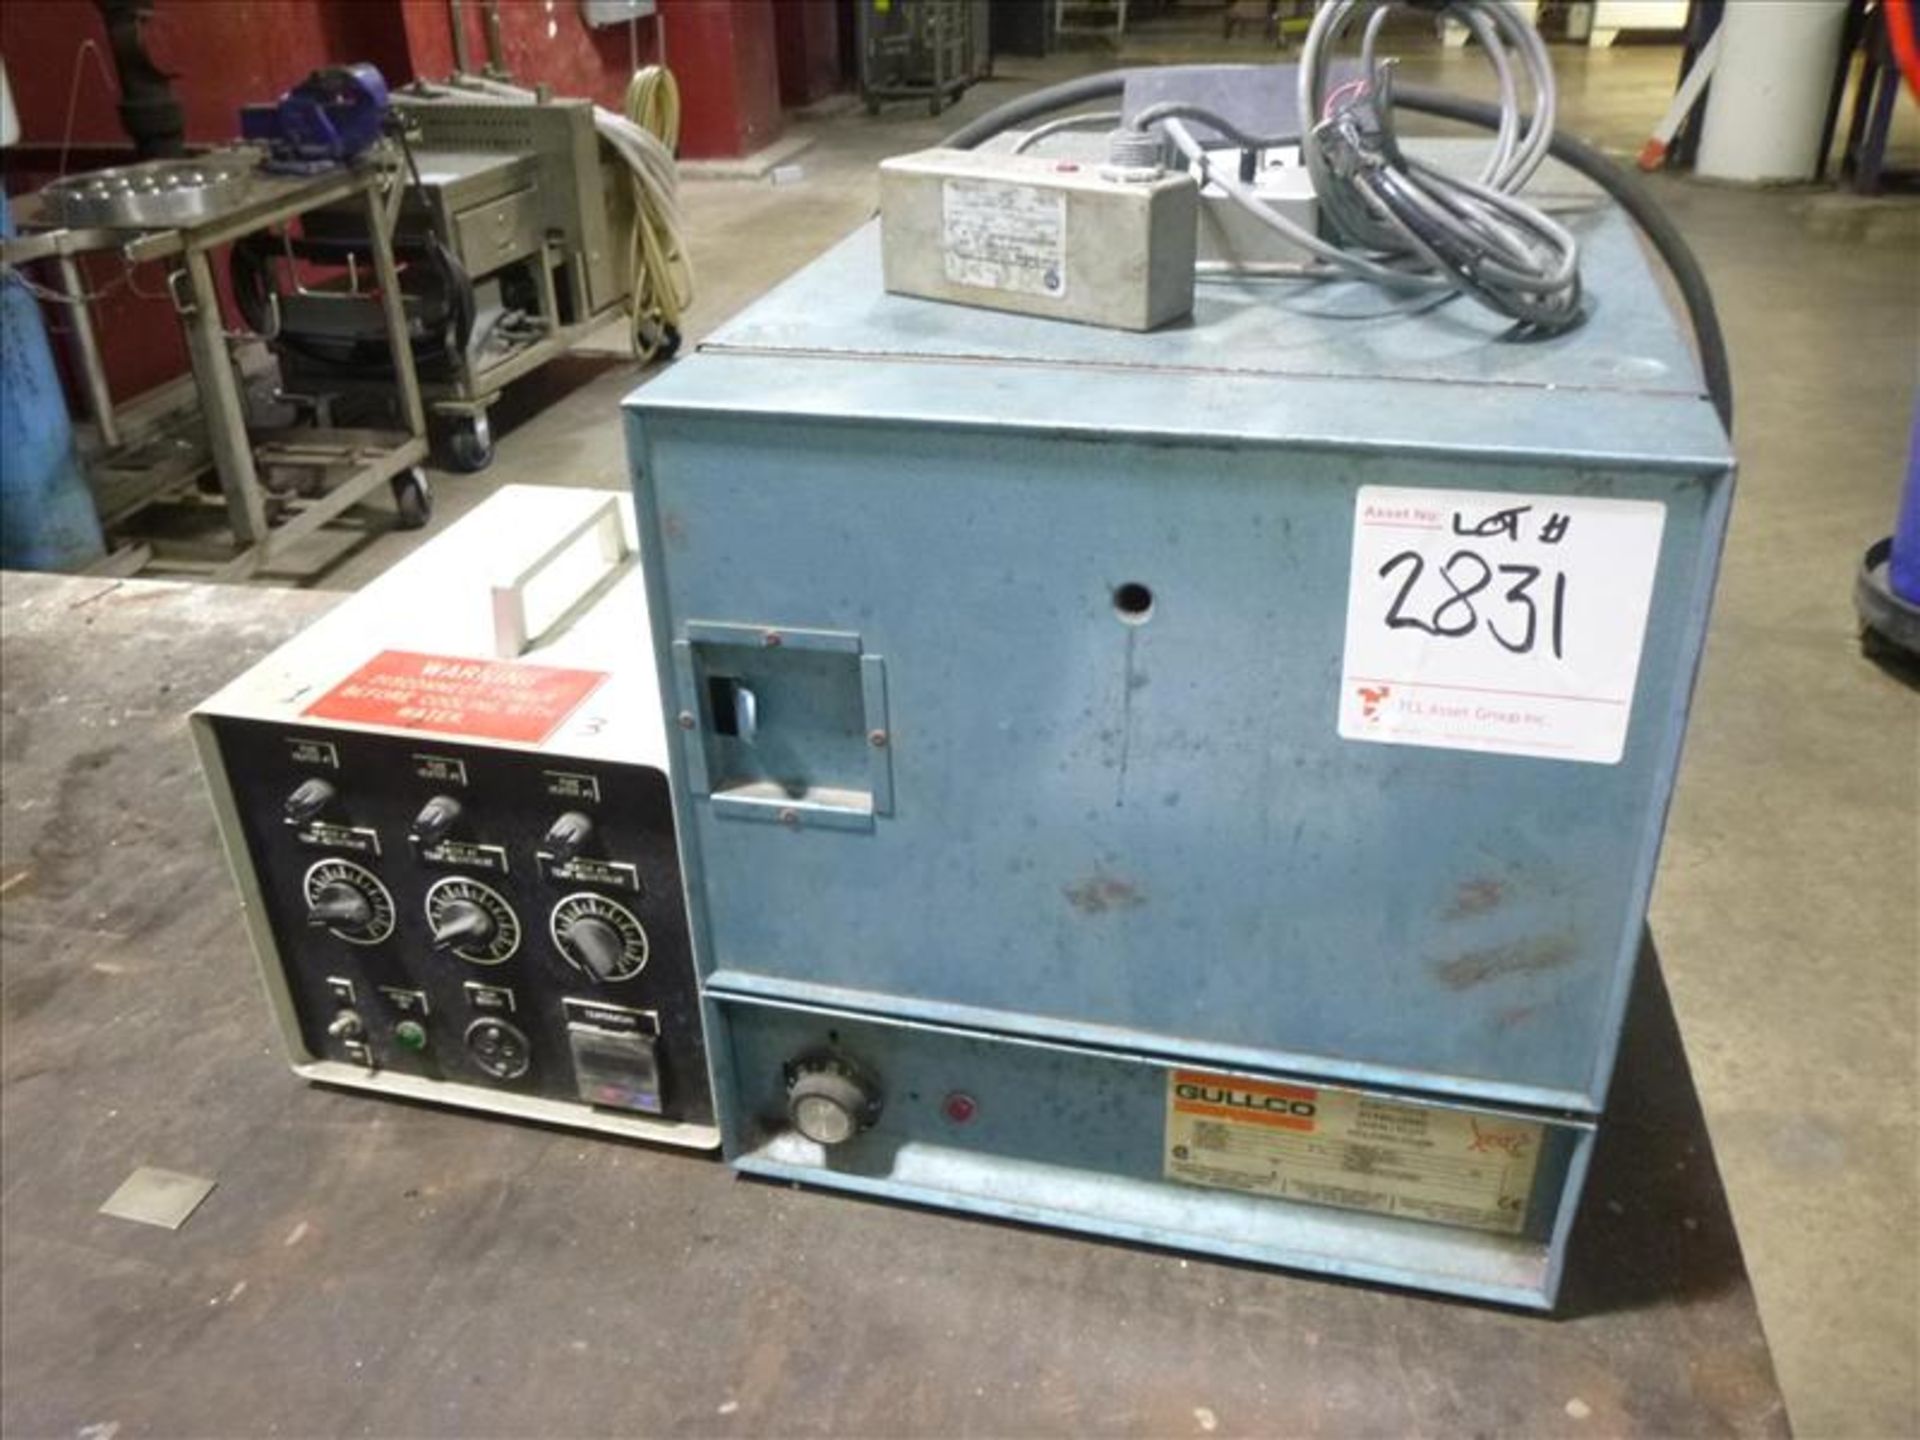 Gullco electrode stabilization oven and 3-zone heater power source [2nd Floor]